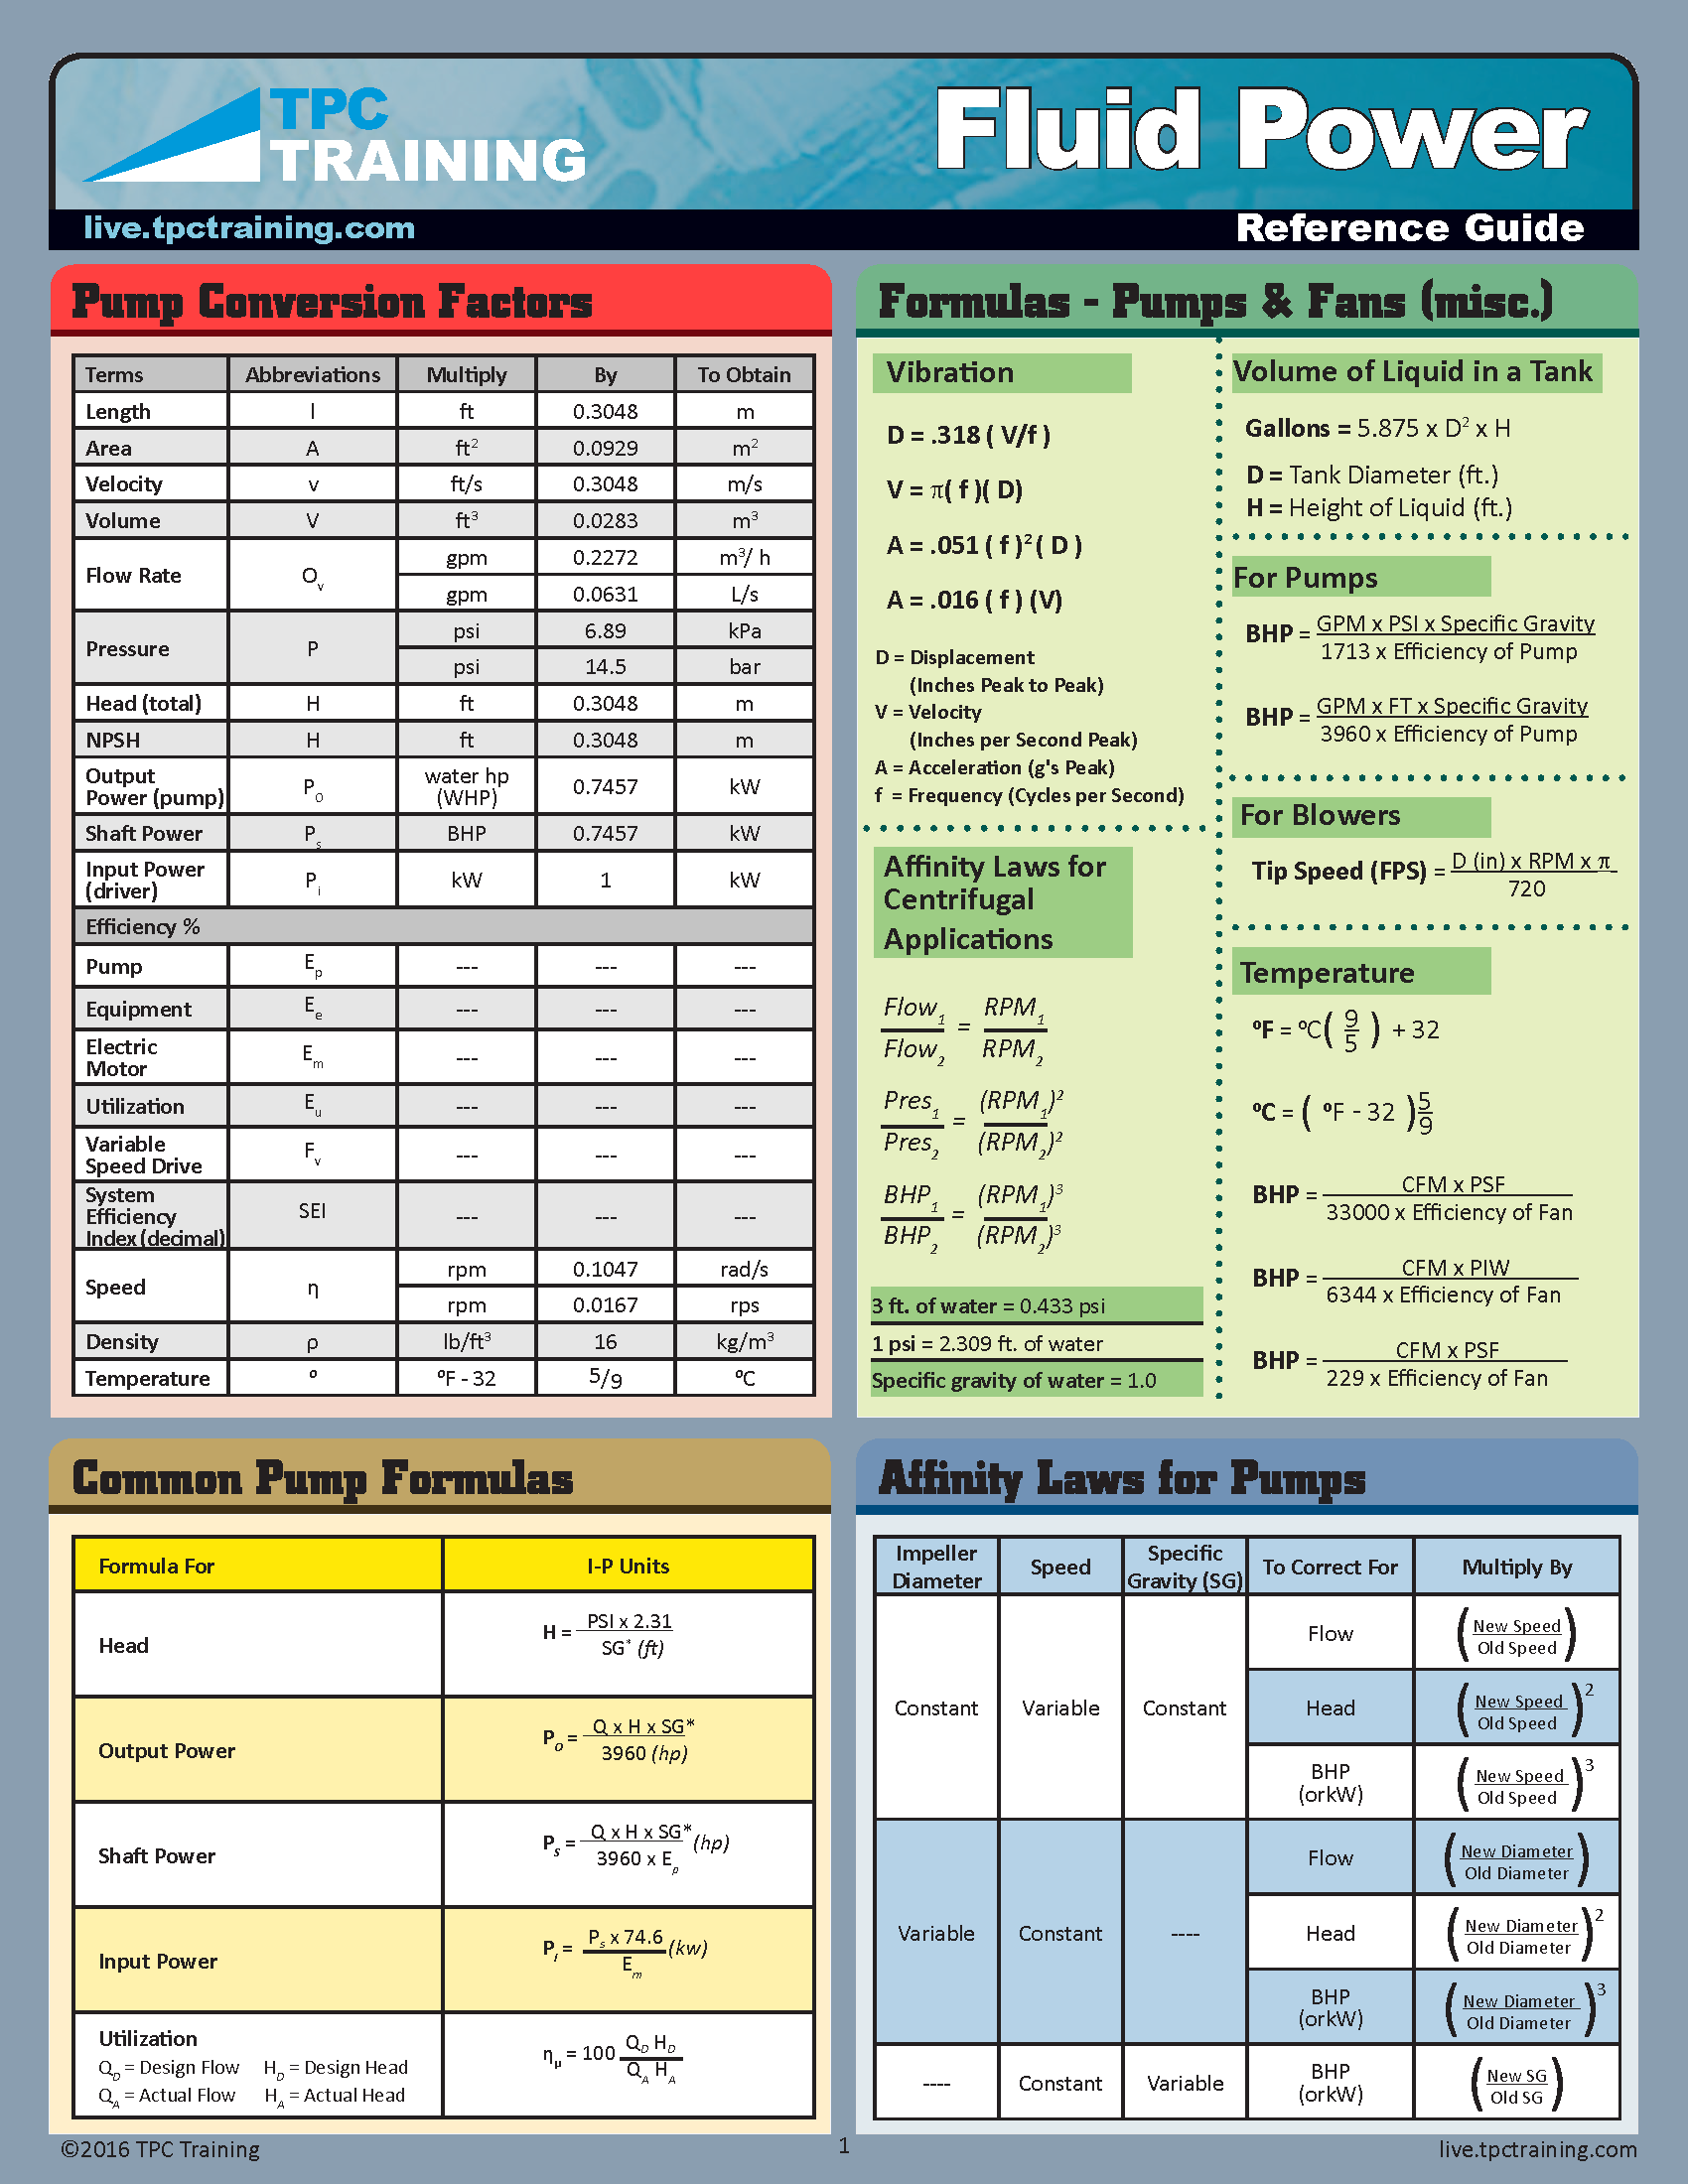 Fluid Power Reference Guide